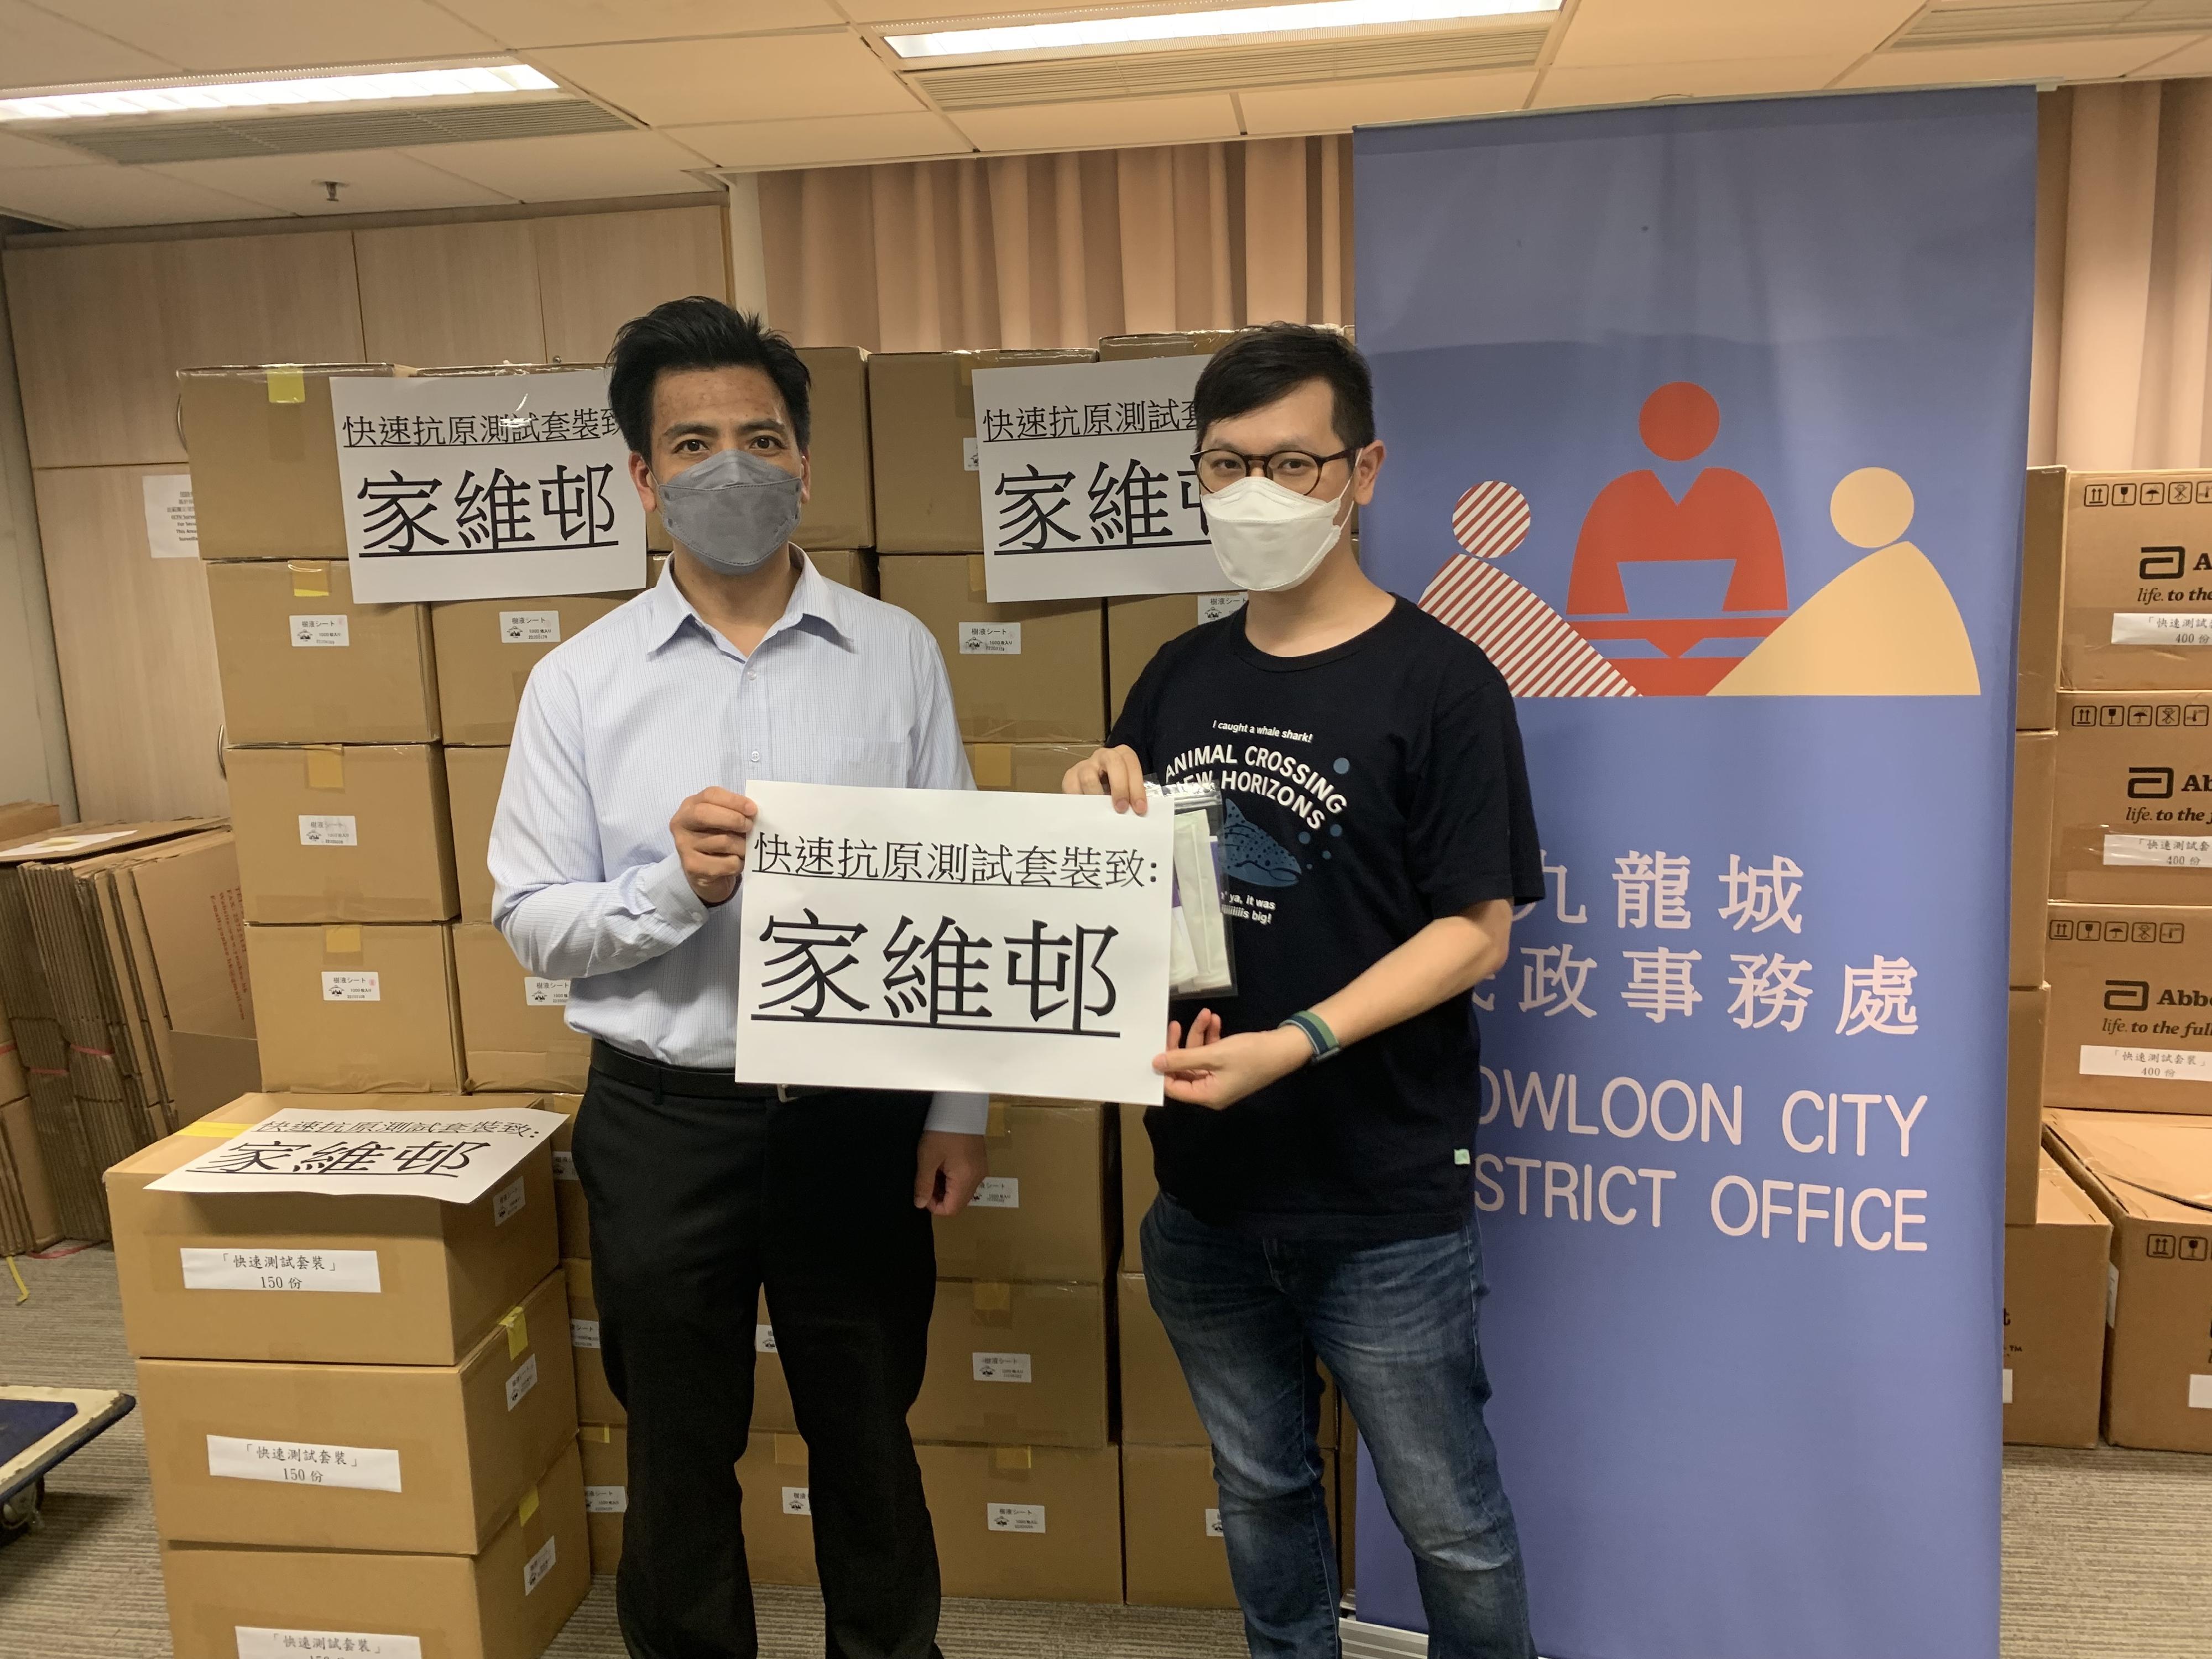 The Kowloon City District Office today (July 8) distributed rapid test kits to households, cleansing workers and property management staff living and working in Ka Wai Chuen for voluntary testing through the property management company.

